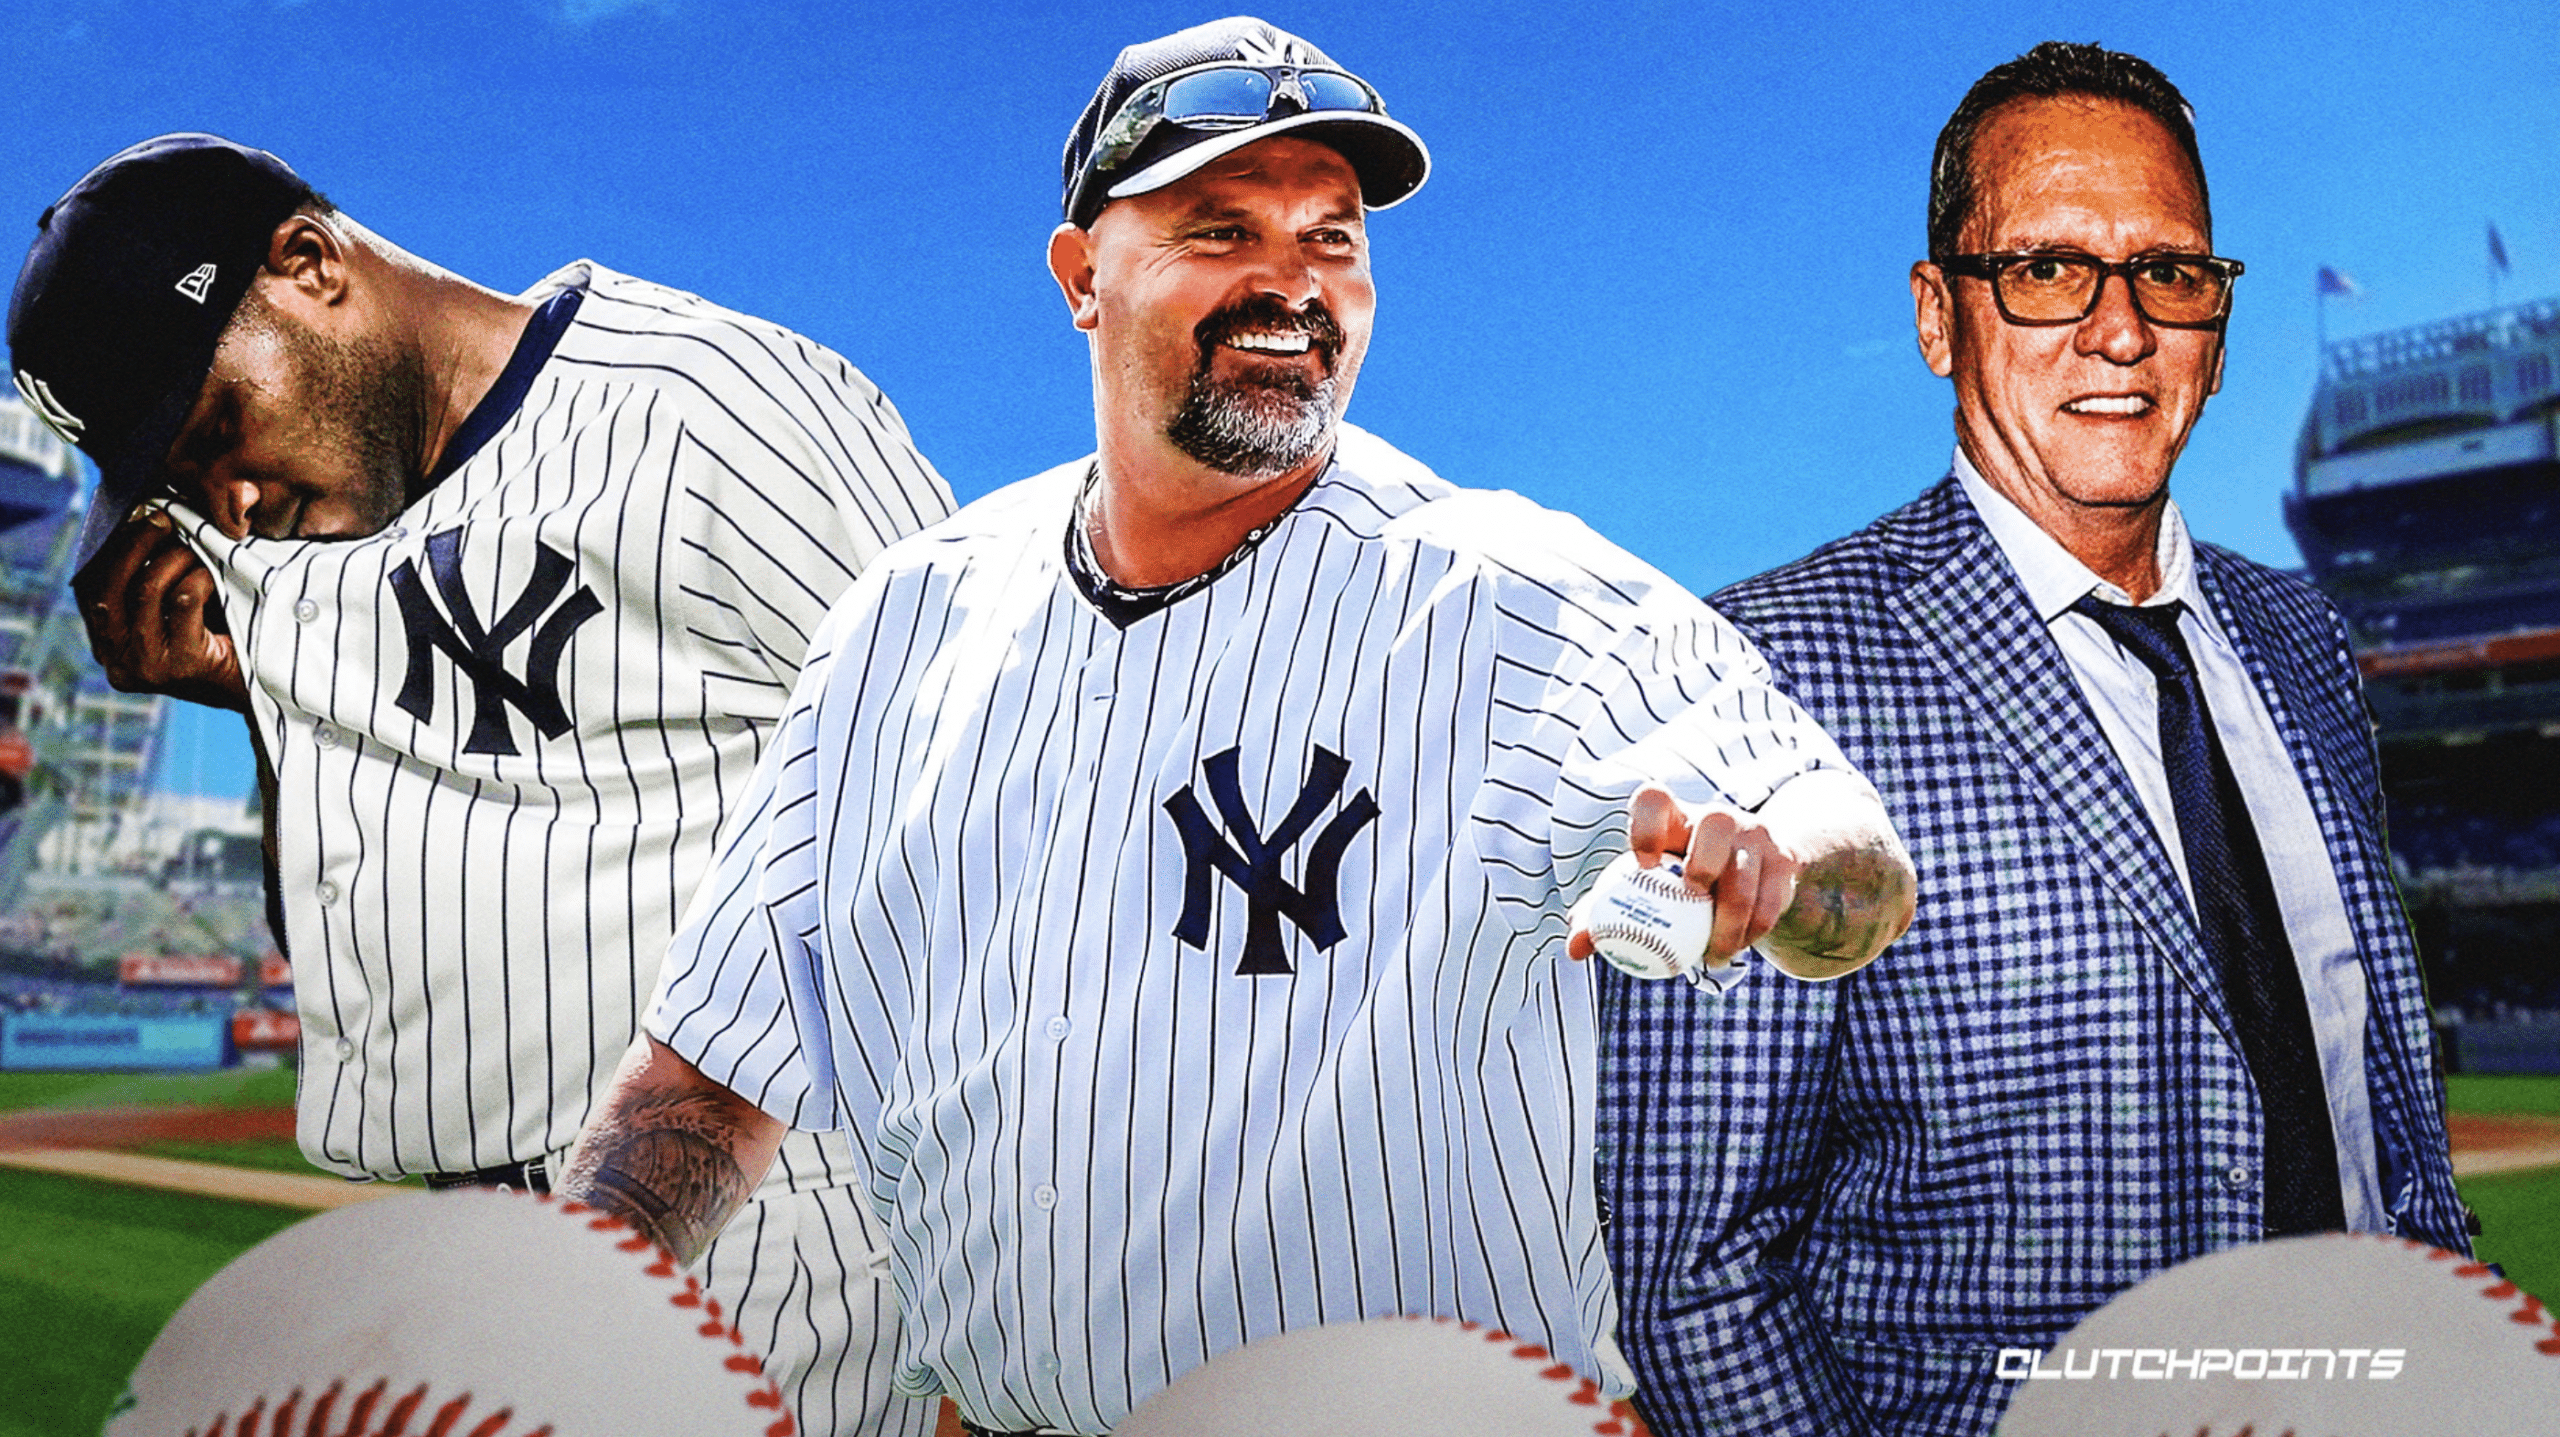 Stars That Make a Difference, David Wells of the New York Yankees